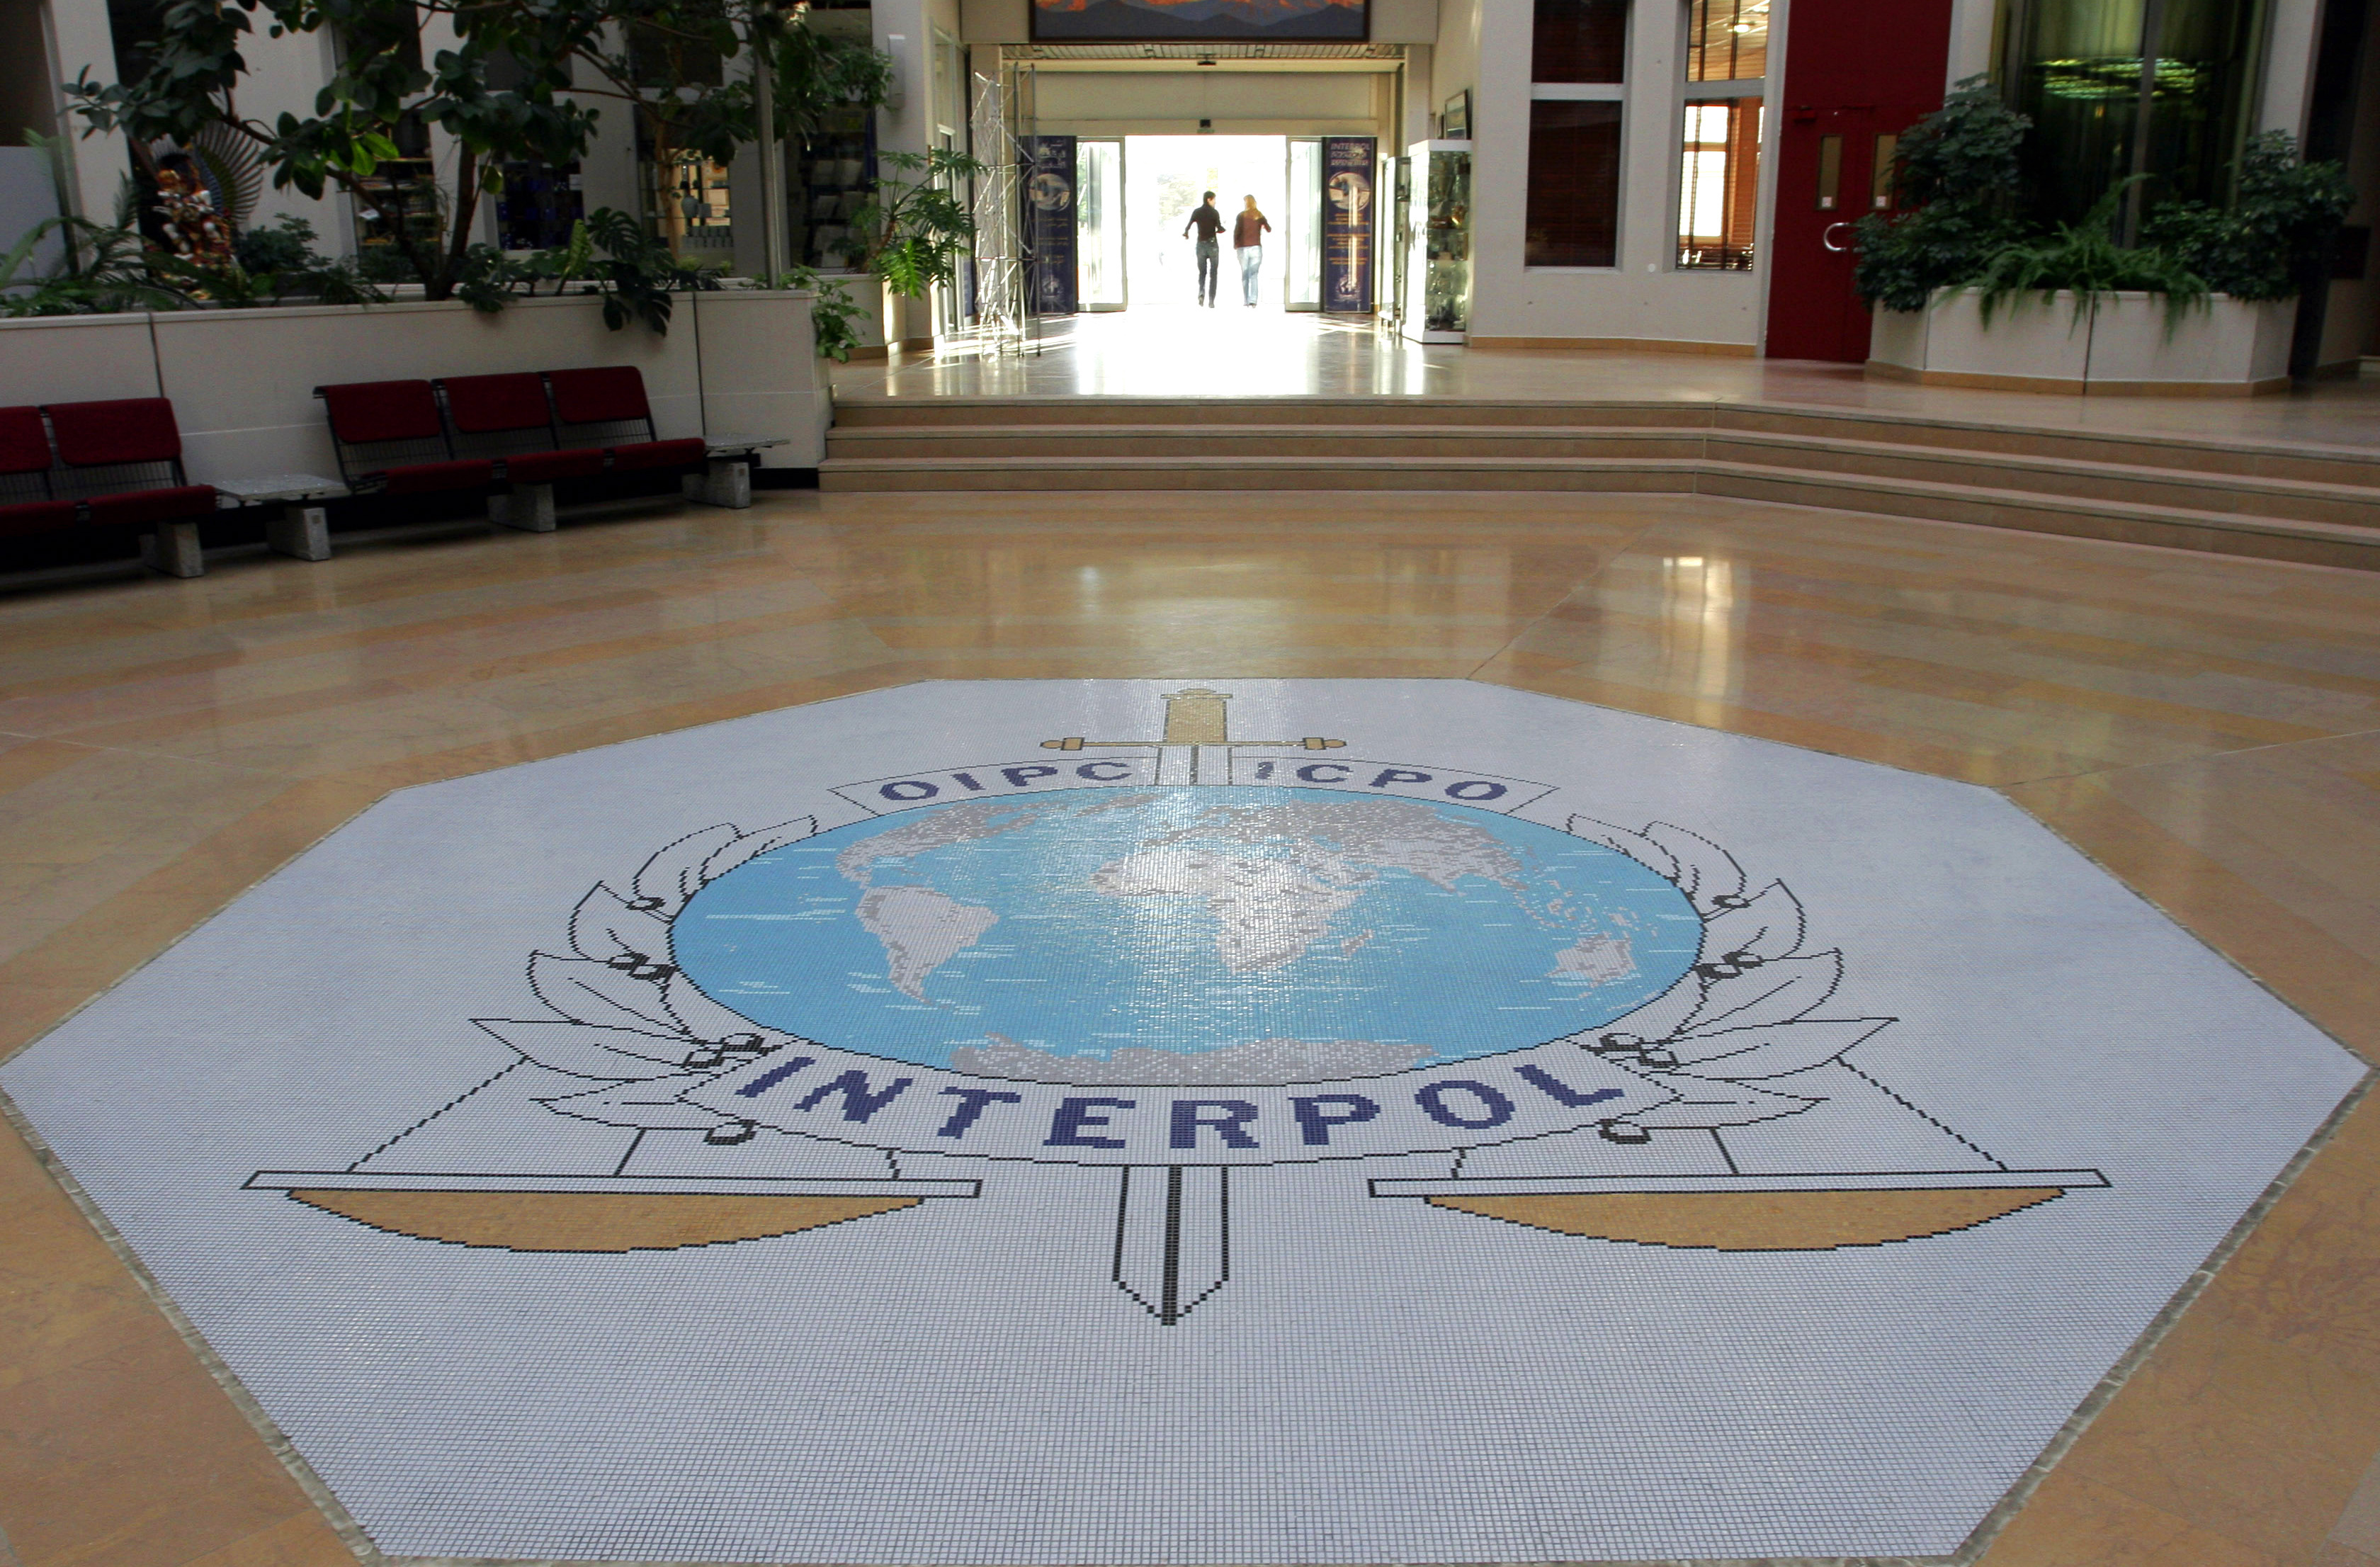 The entrance hall of Interpol's headquarters in Lyon, central France